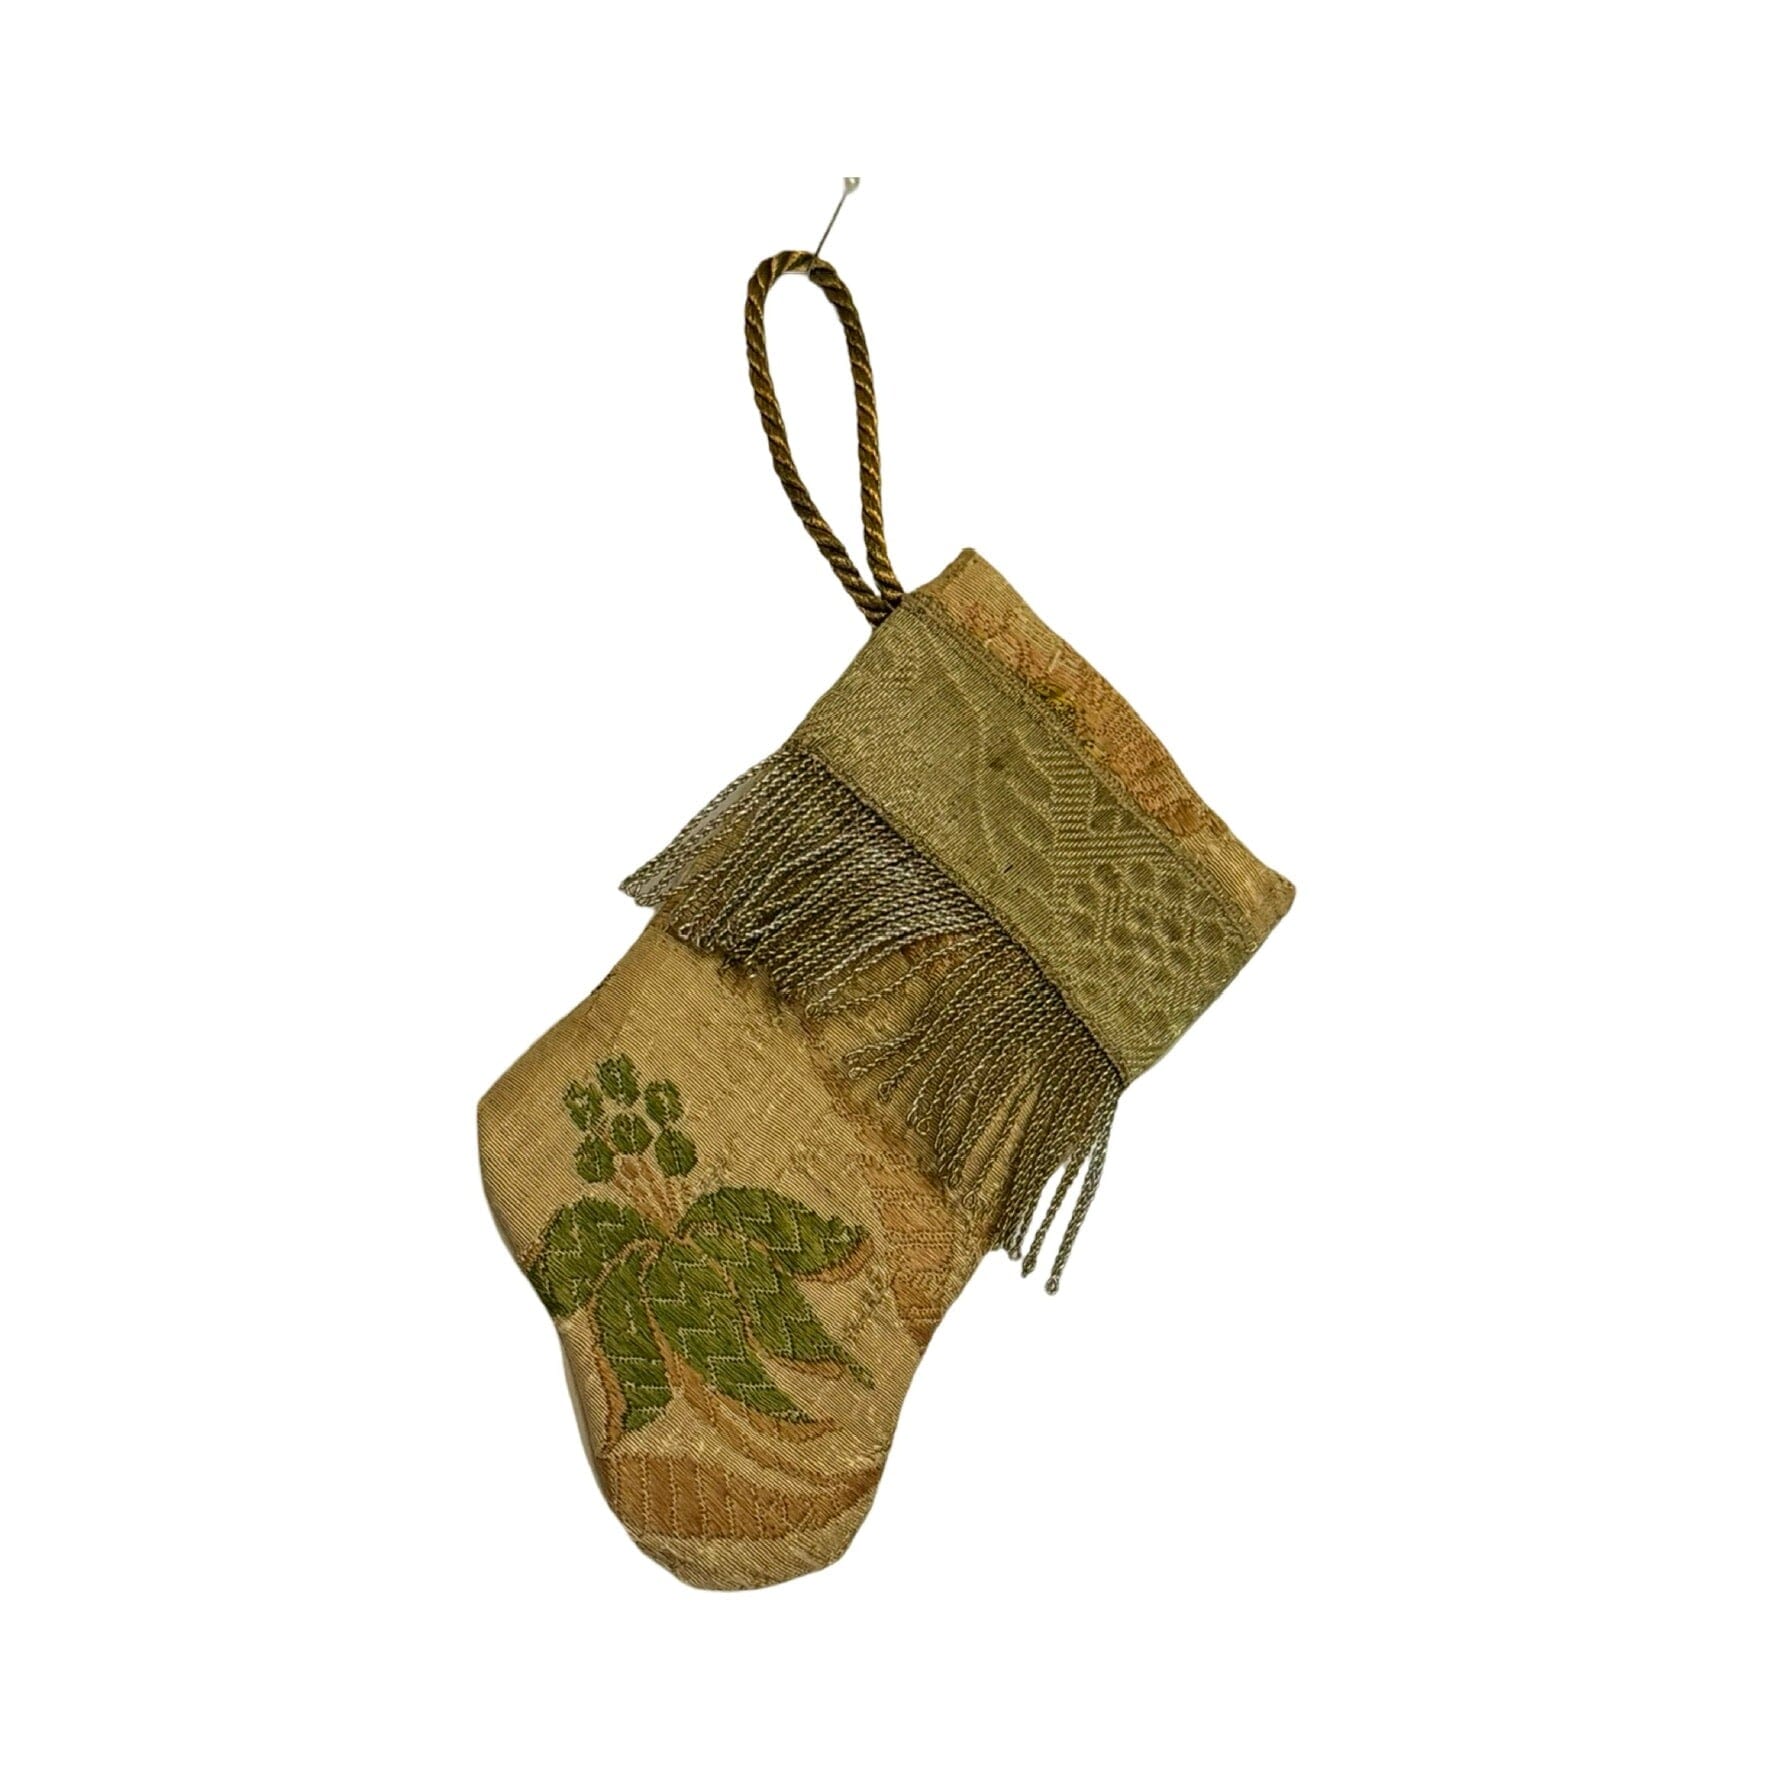 Handmade Mini Stocking Made From Vintage Fabric and Trims- Champagne Embroidery Ornament B. Viz Design E 